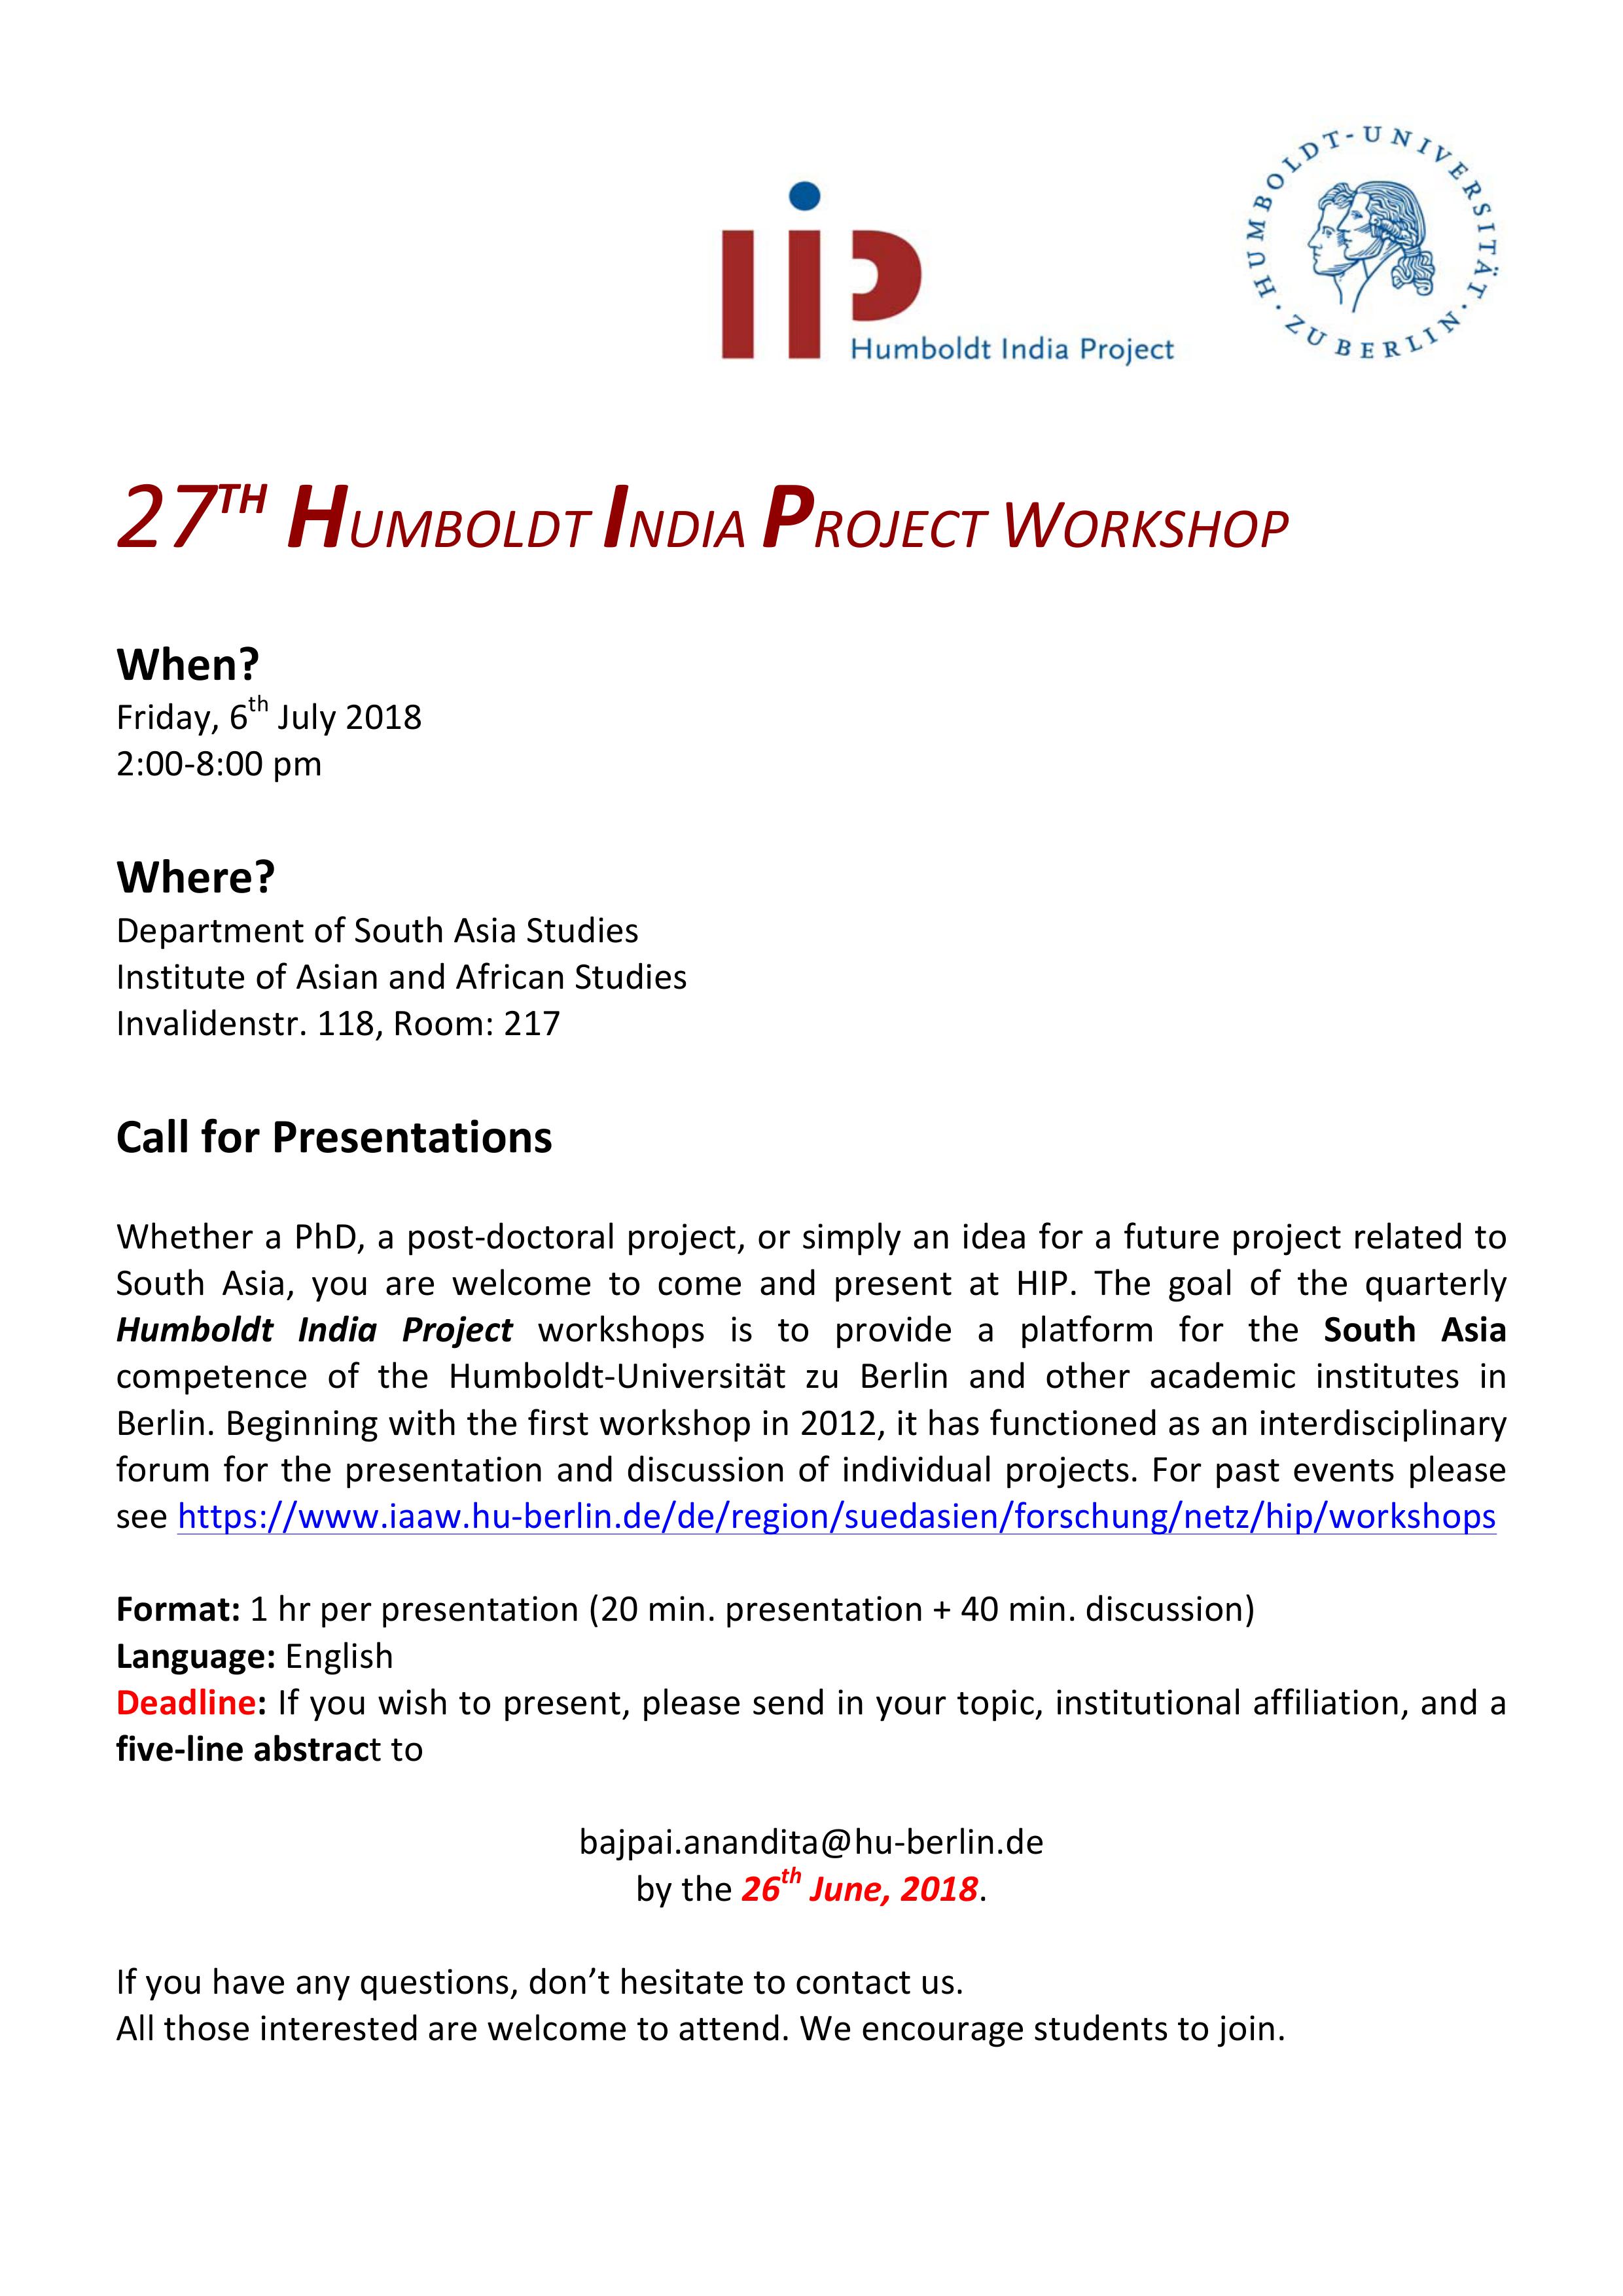 27 HIP Call for Presentations 6th July 2018